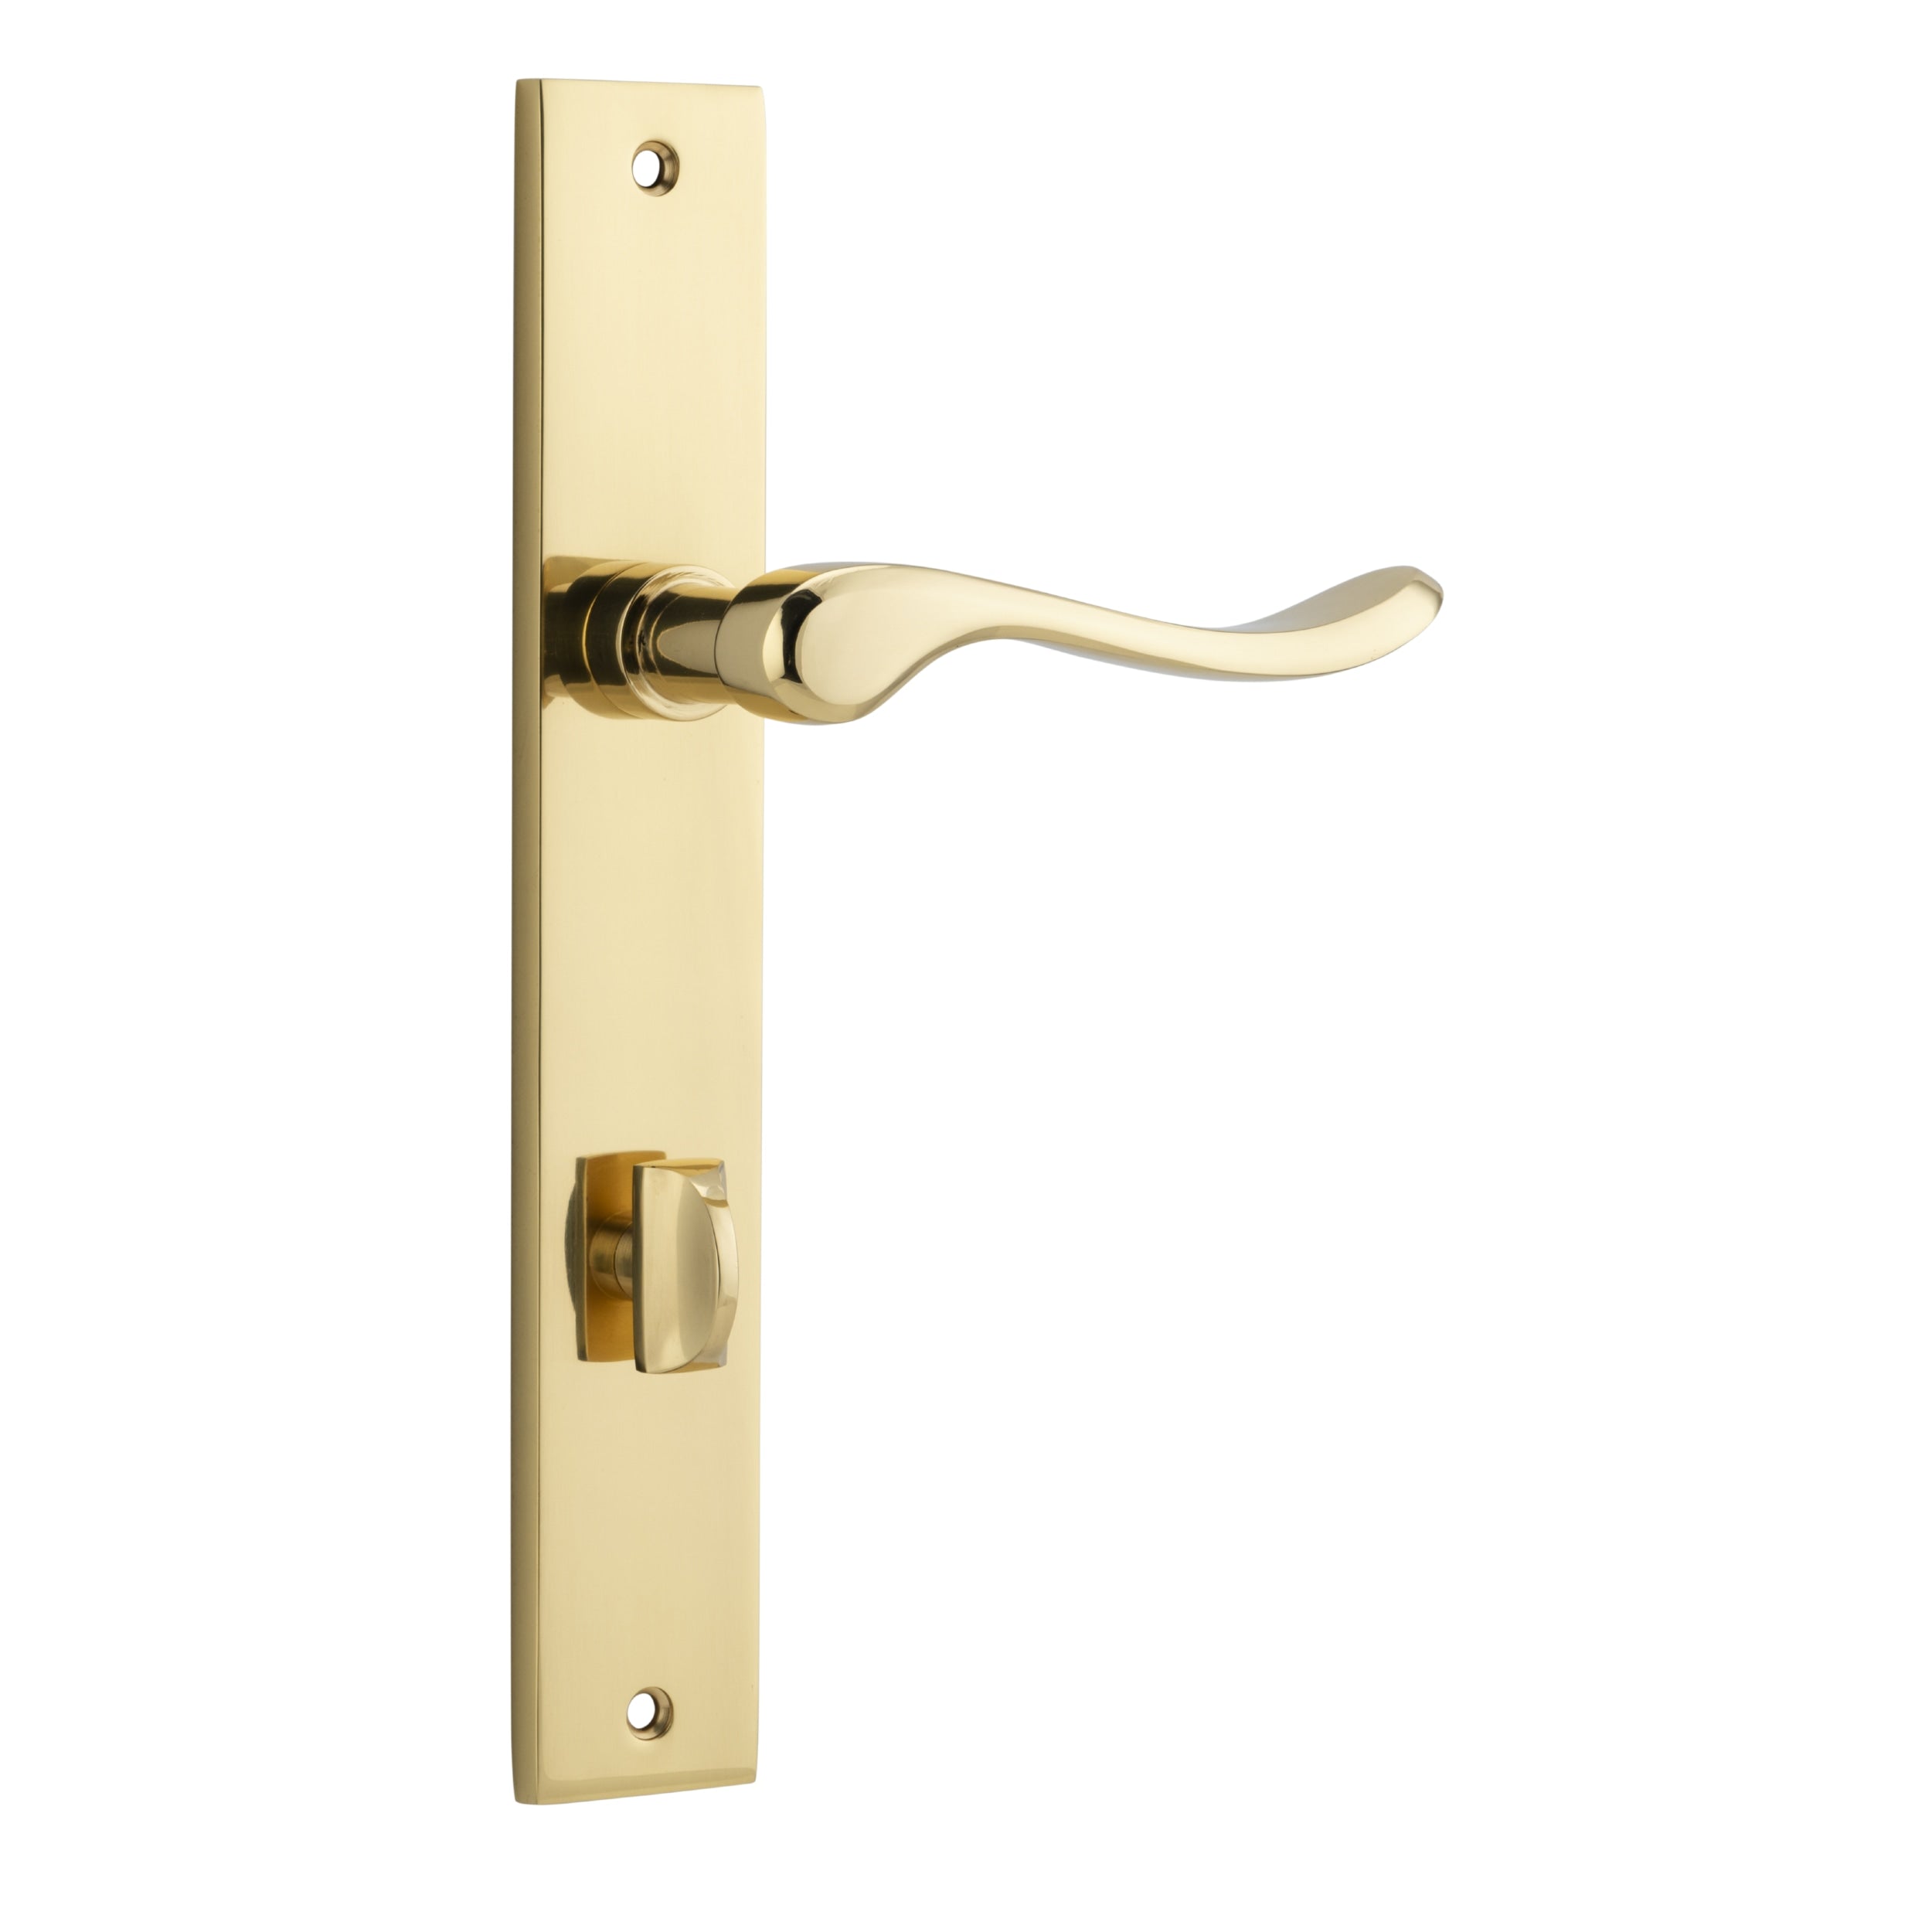 Iver Door Handle Stirling Rectangular Privacy Pair Polished Brass